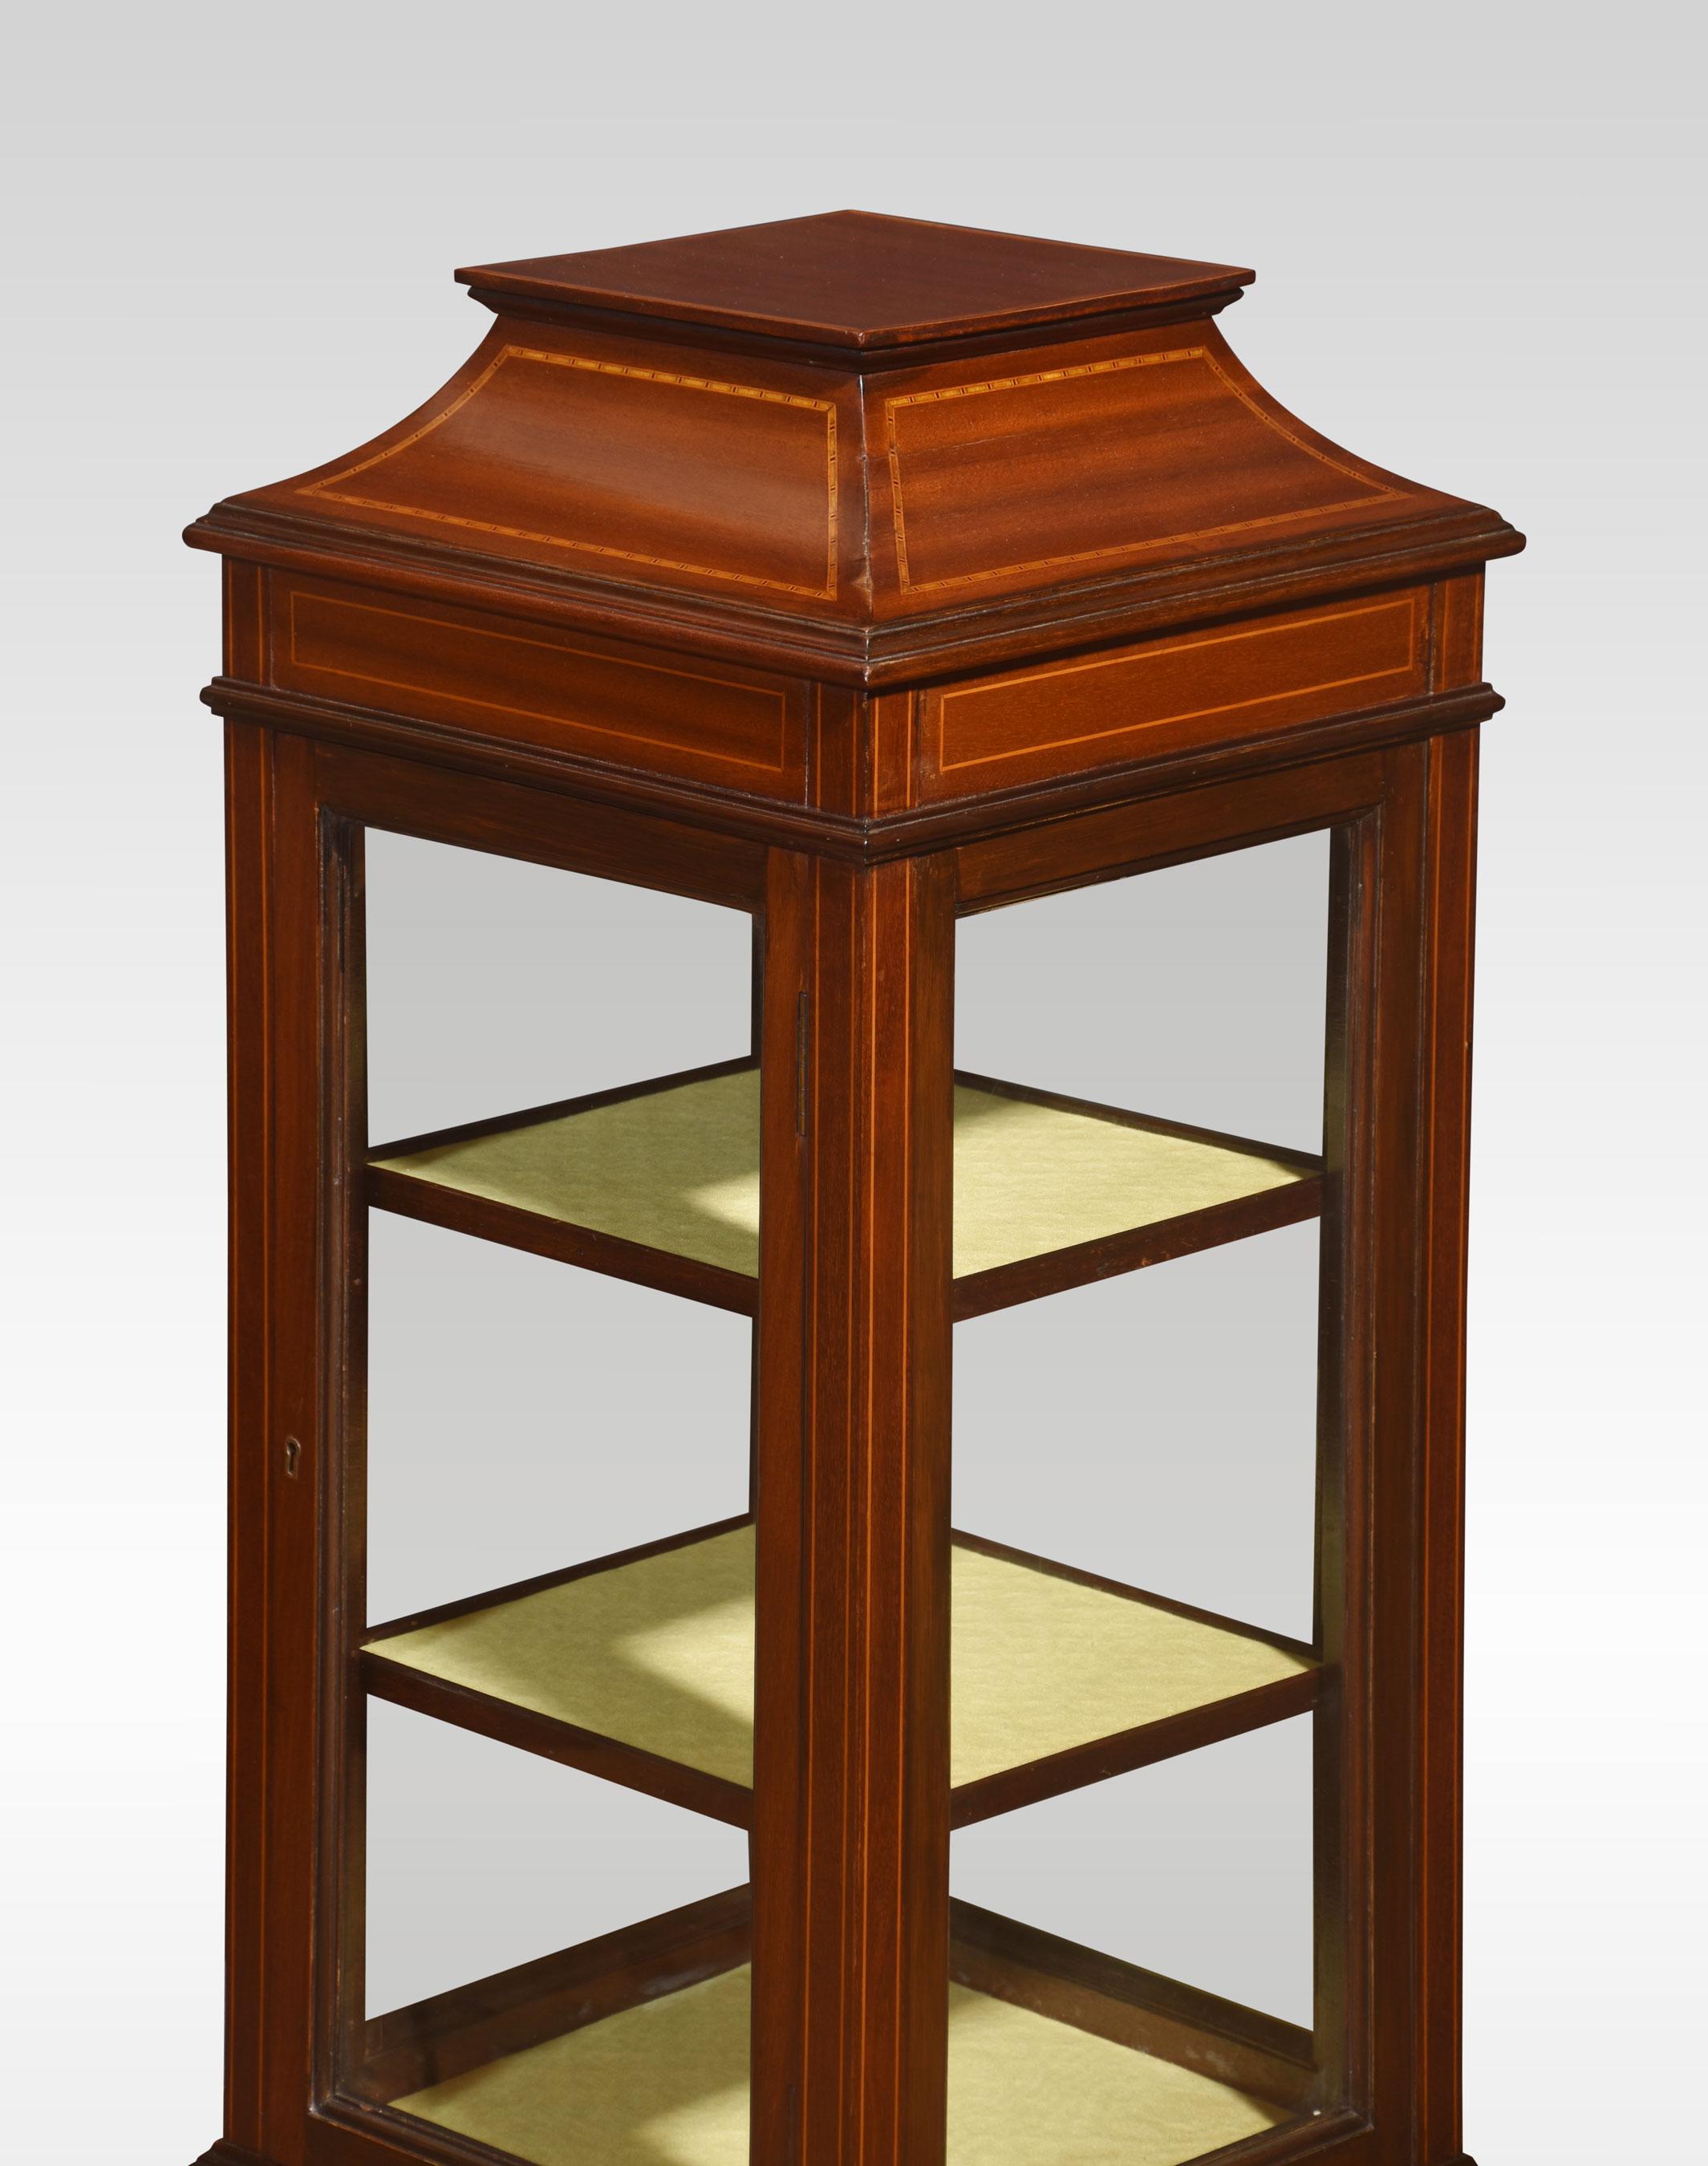 Mahogany inlaid pillar display cabinet, the square top above-glazed door opening to reveal upholstered shelve interior. All raised on tapering legs terminating in spade feet.
Dimensions
Height 38.5 Inches
Width 14 Inches
Depth 14 Inches